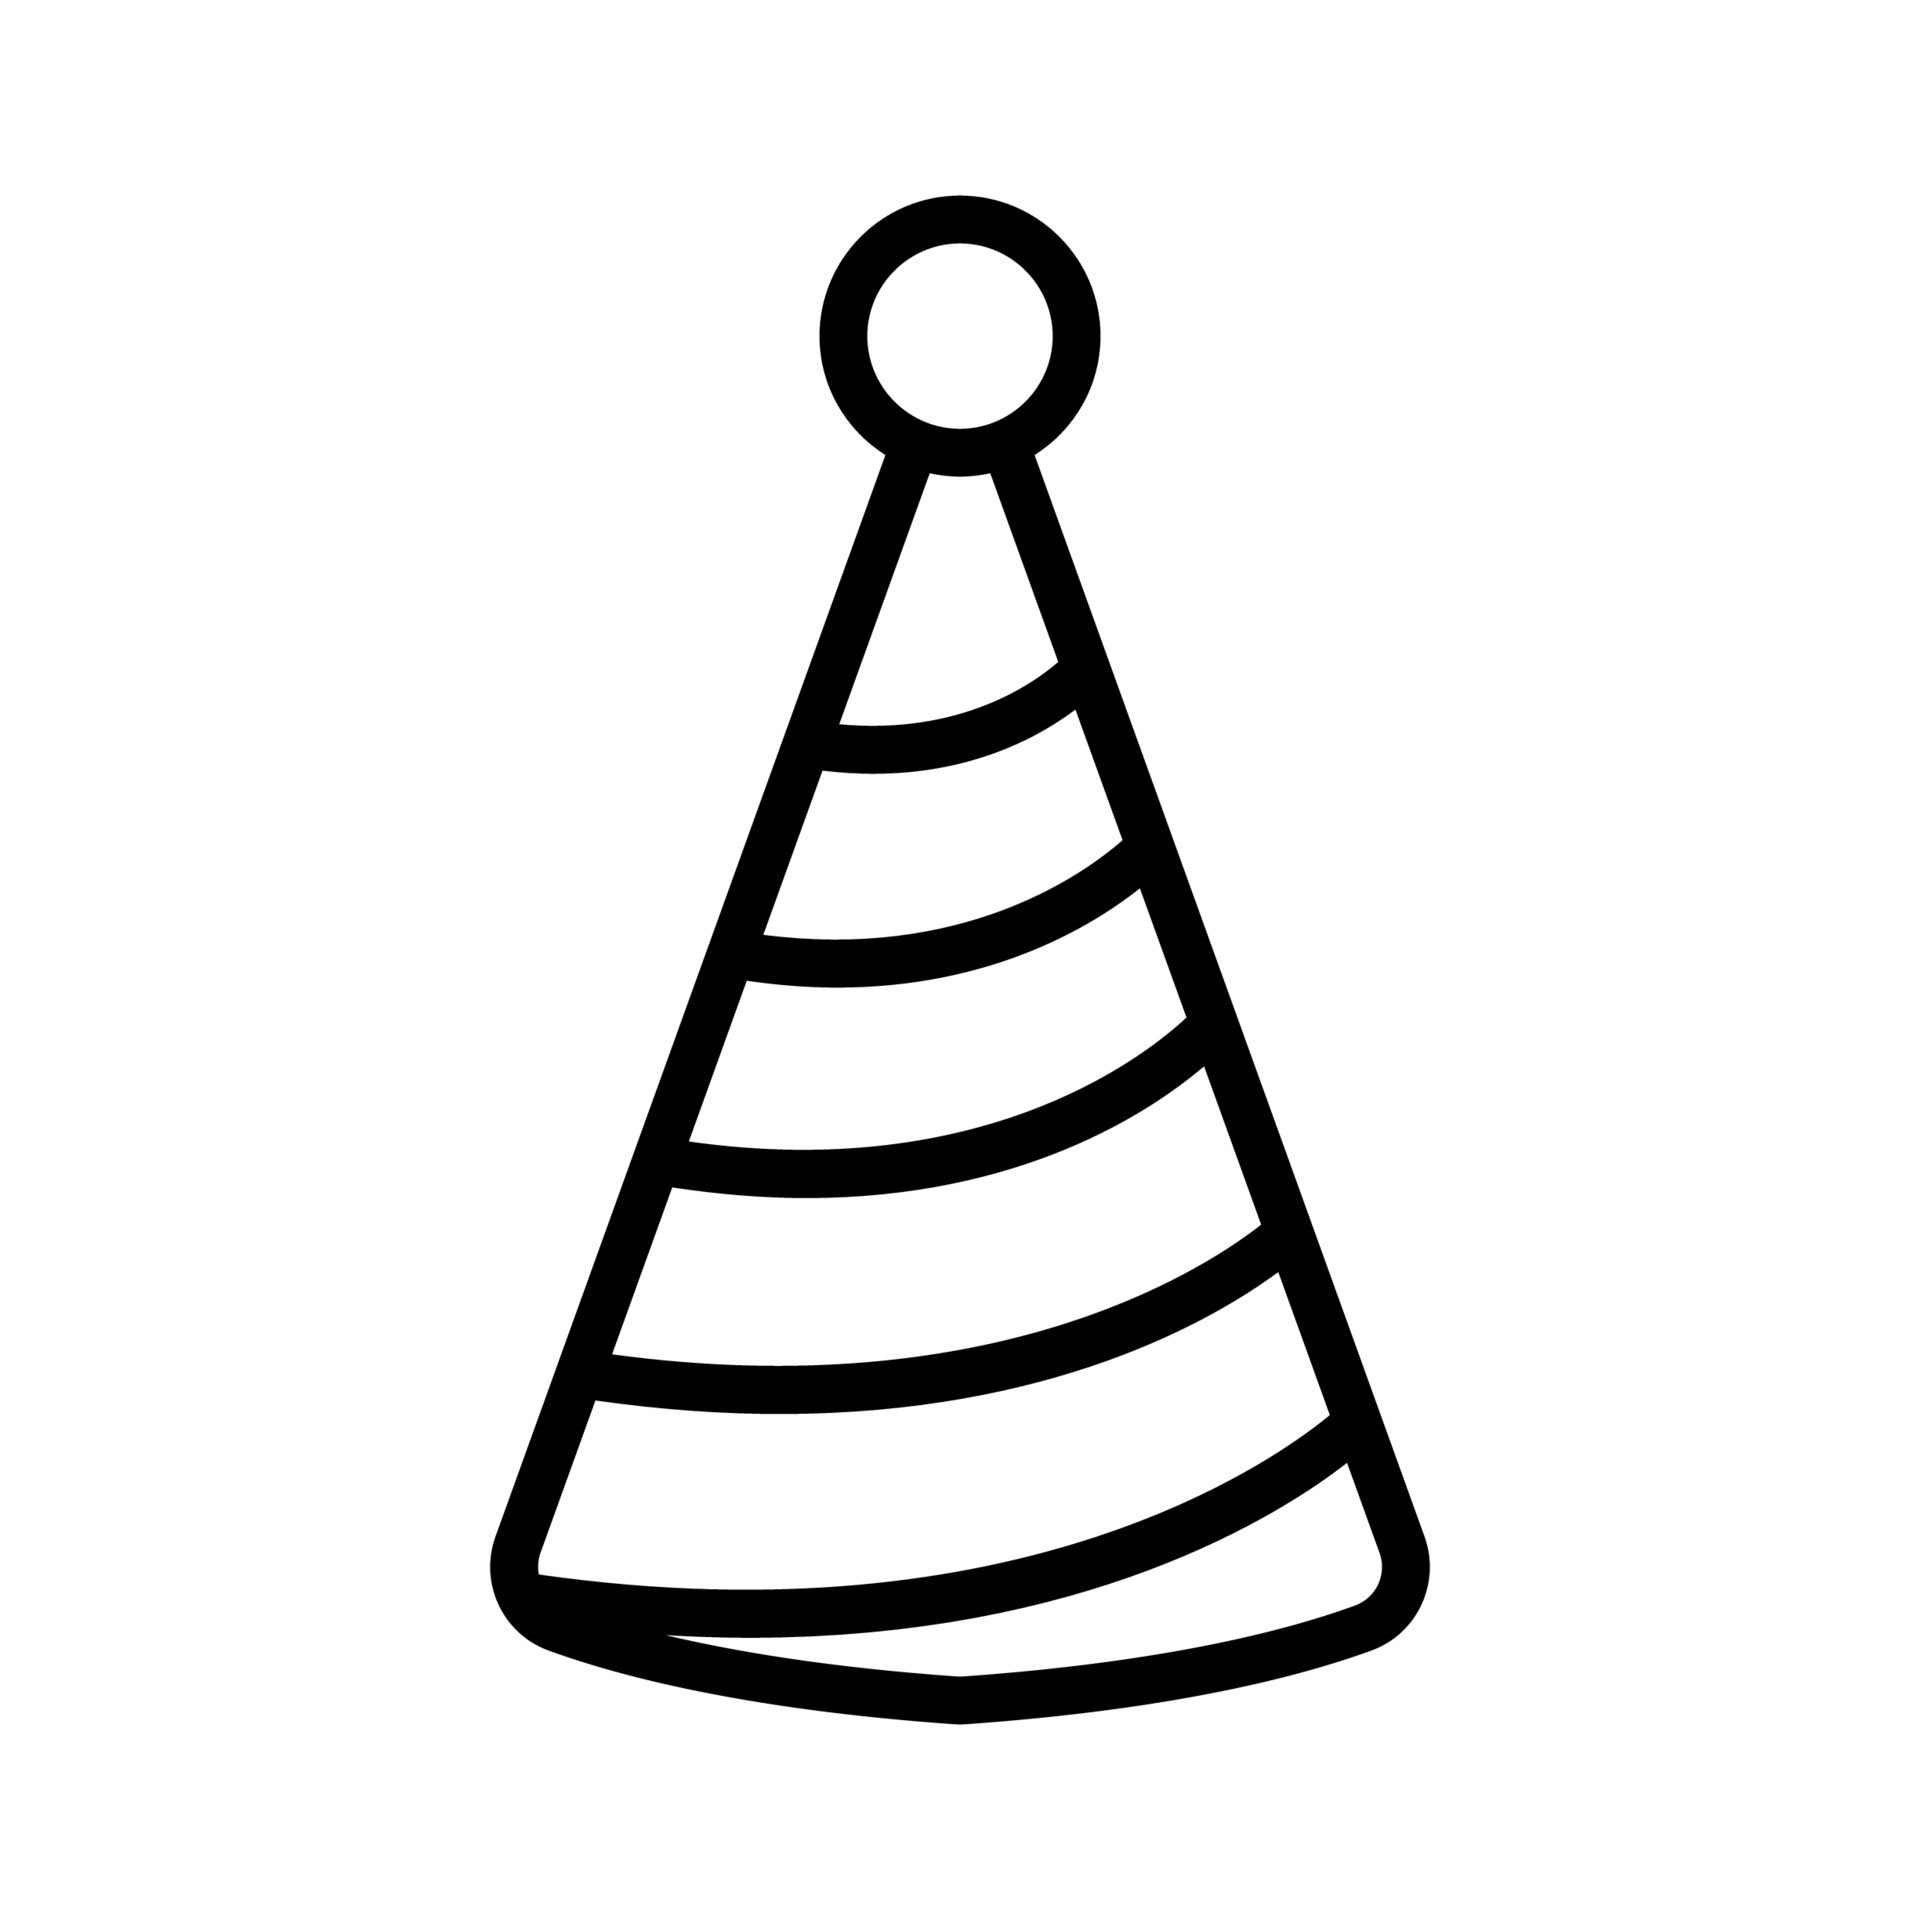 cone shaped hat icon vector outline illustration 9974644 Vector